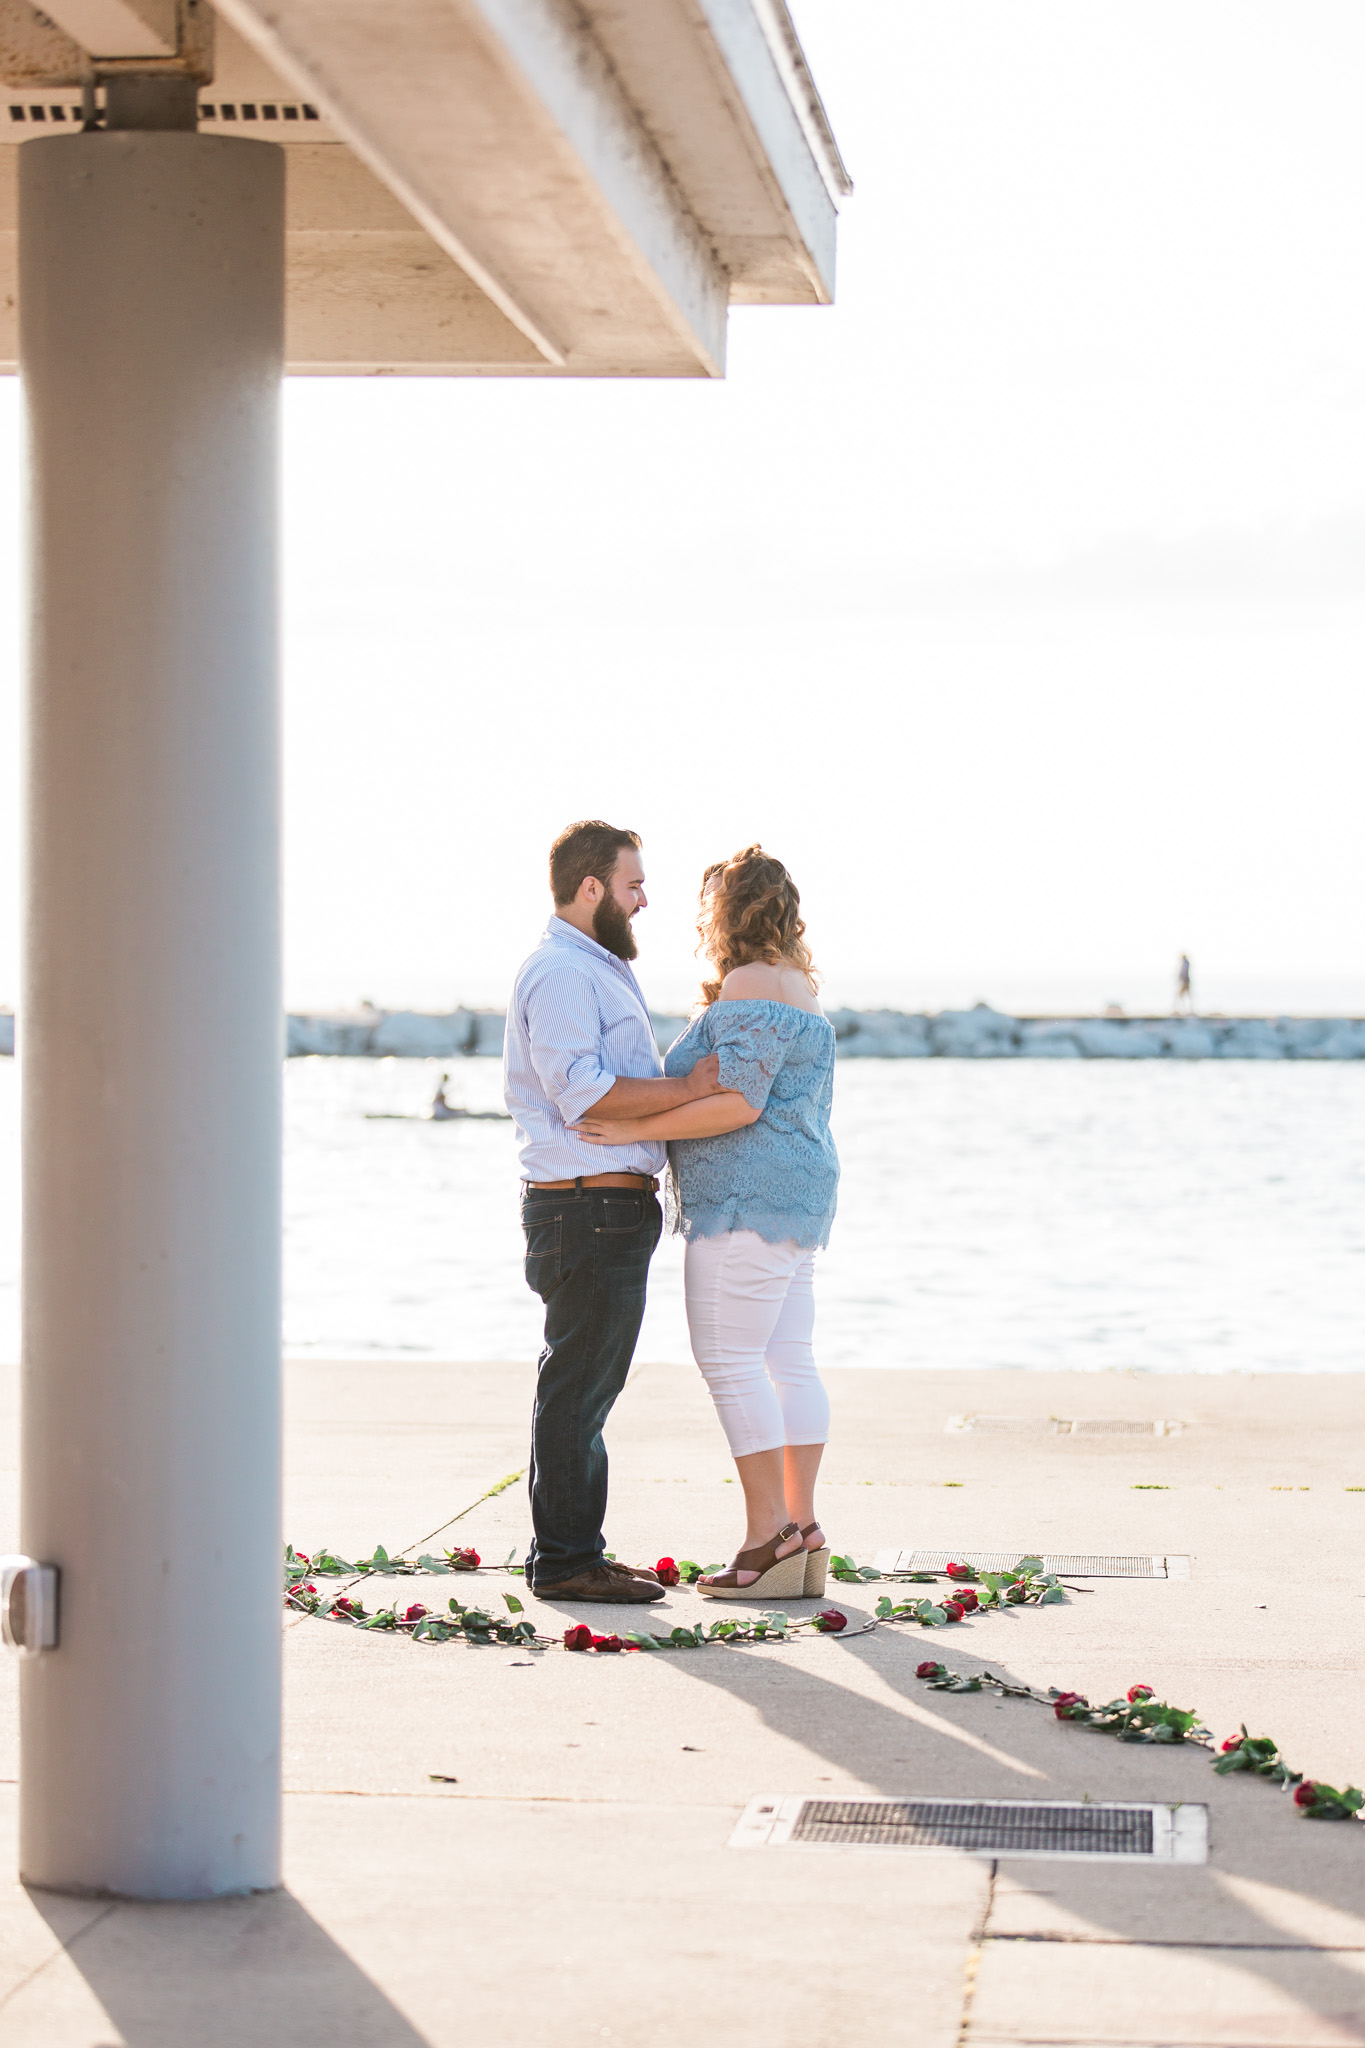  Romantic Petoskey Michigan Proposal on the Pier with Rose Trail | How He Asked | She Said Yes | Laurenda Marie Photography 